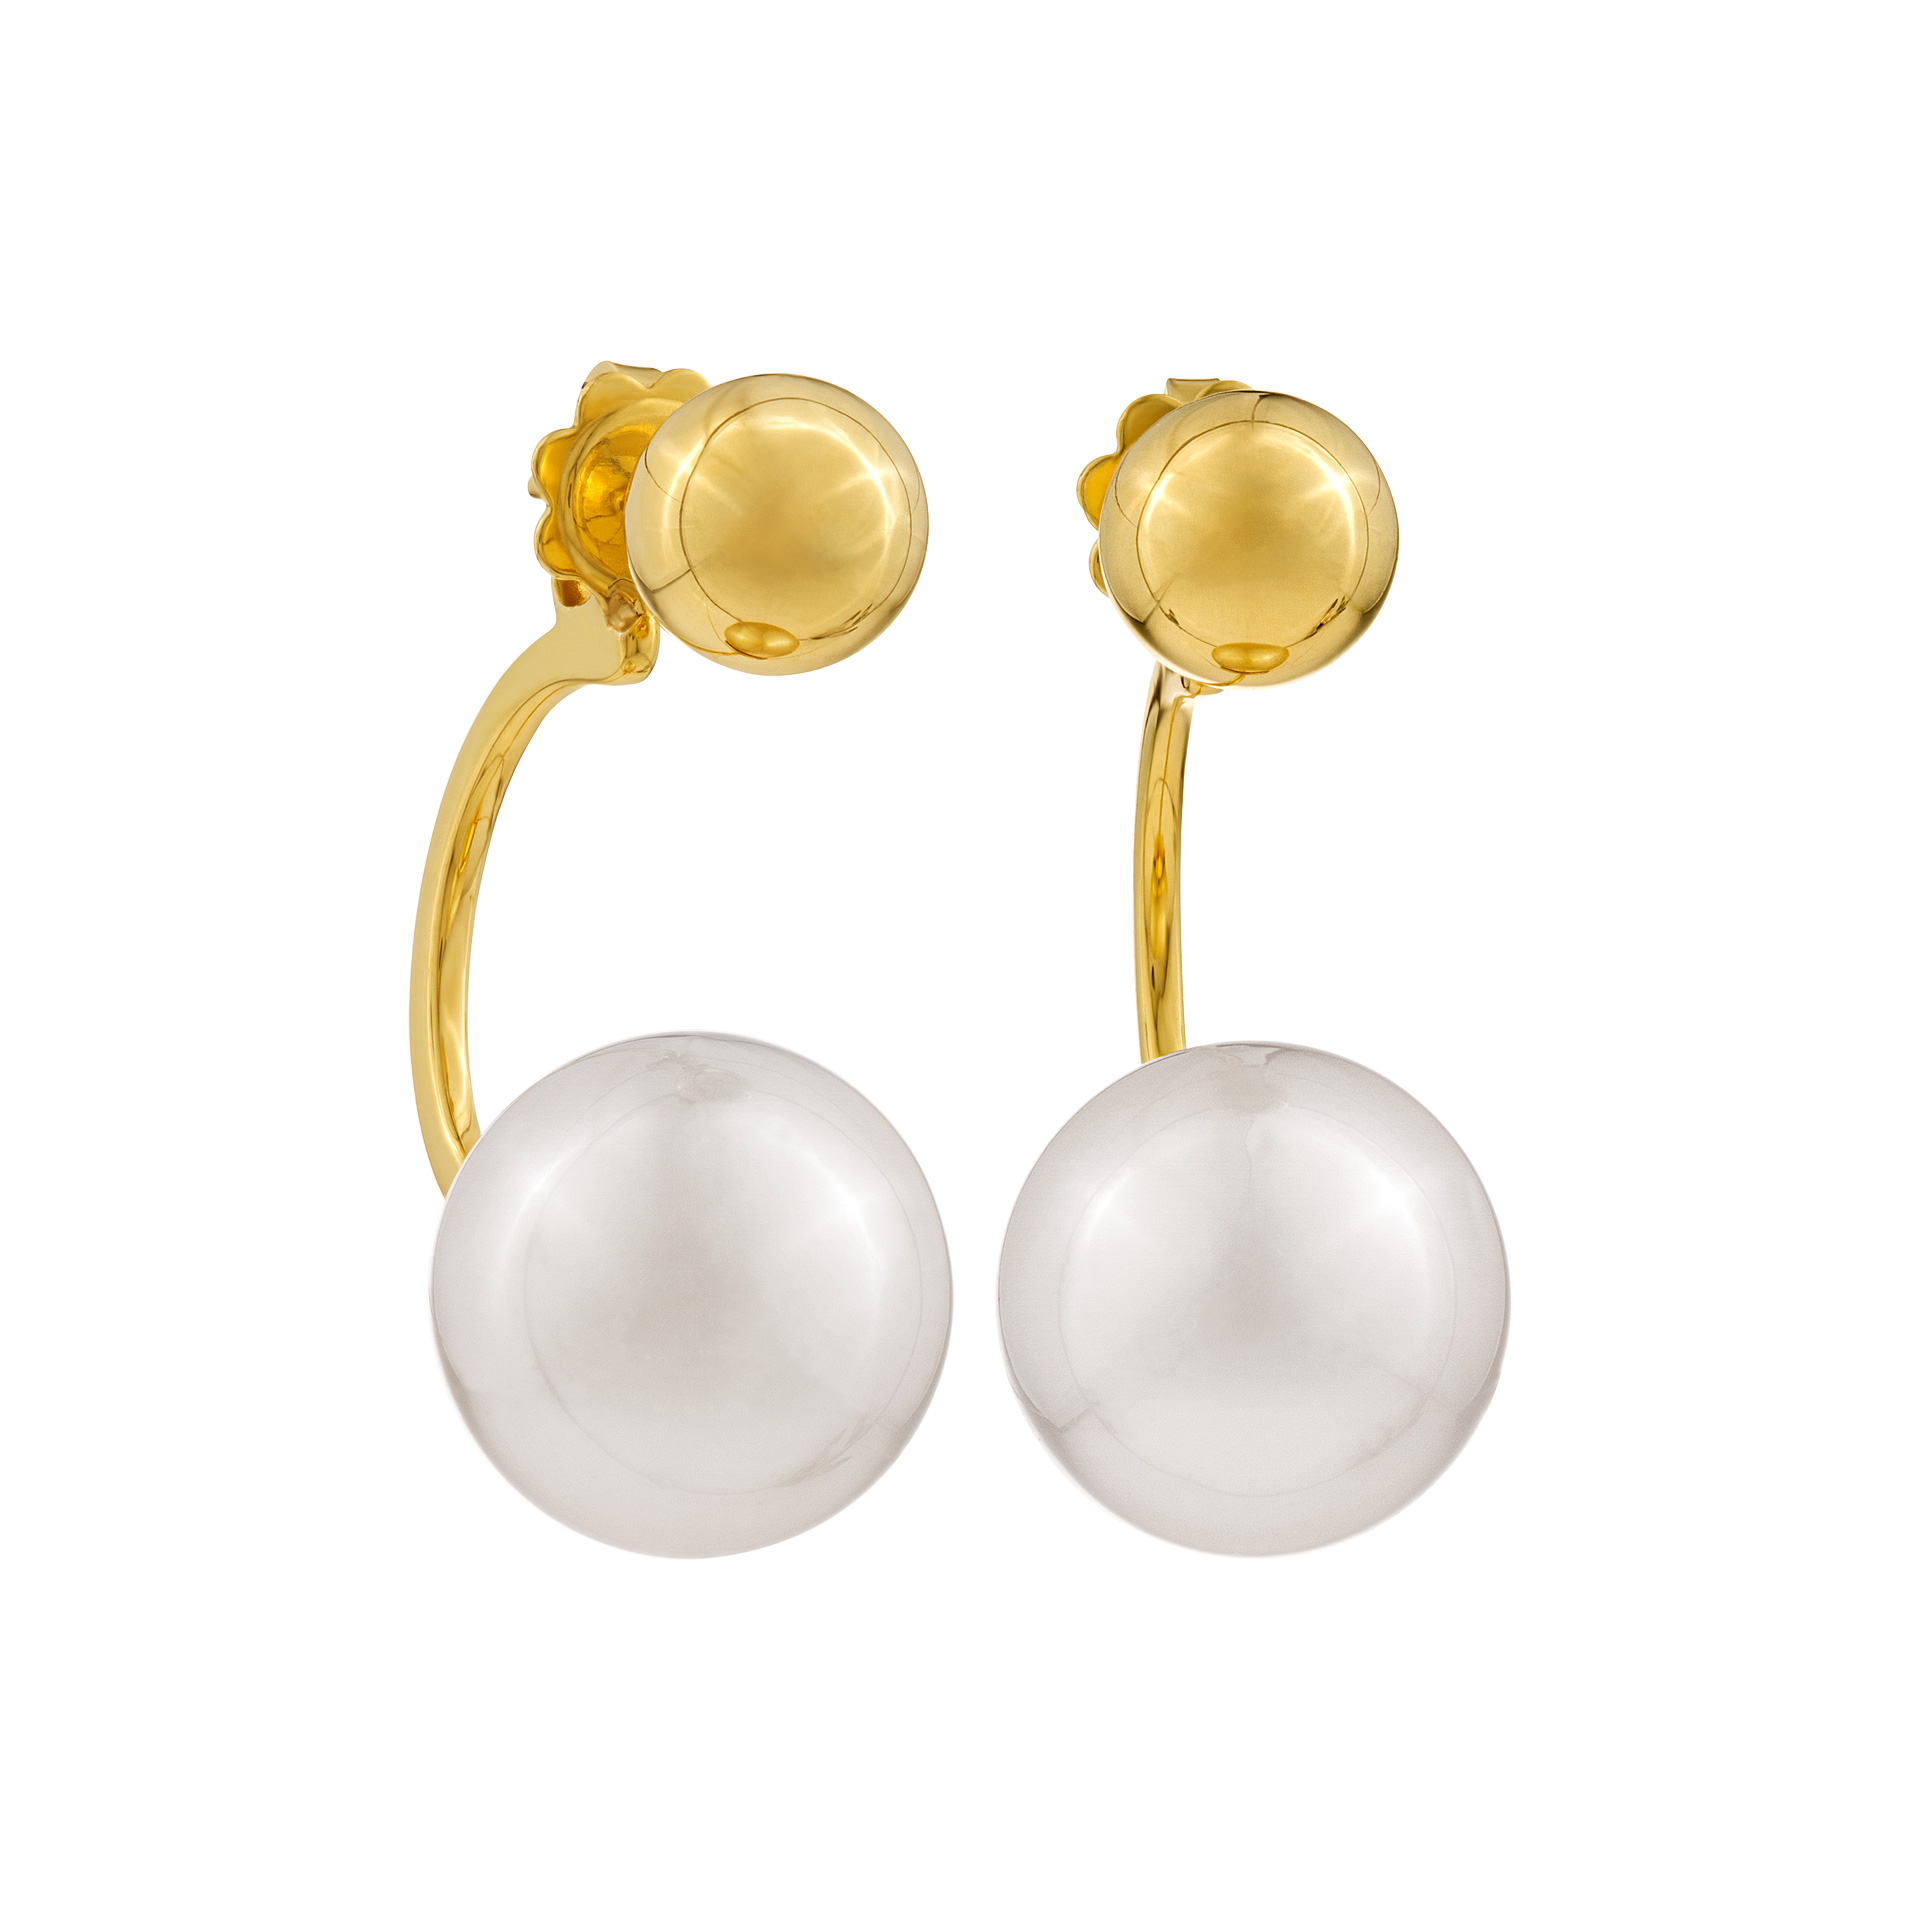 Golden pearl and 18K gold stud earrings